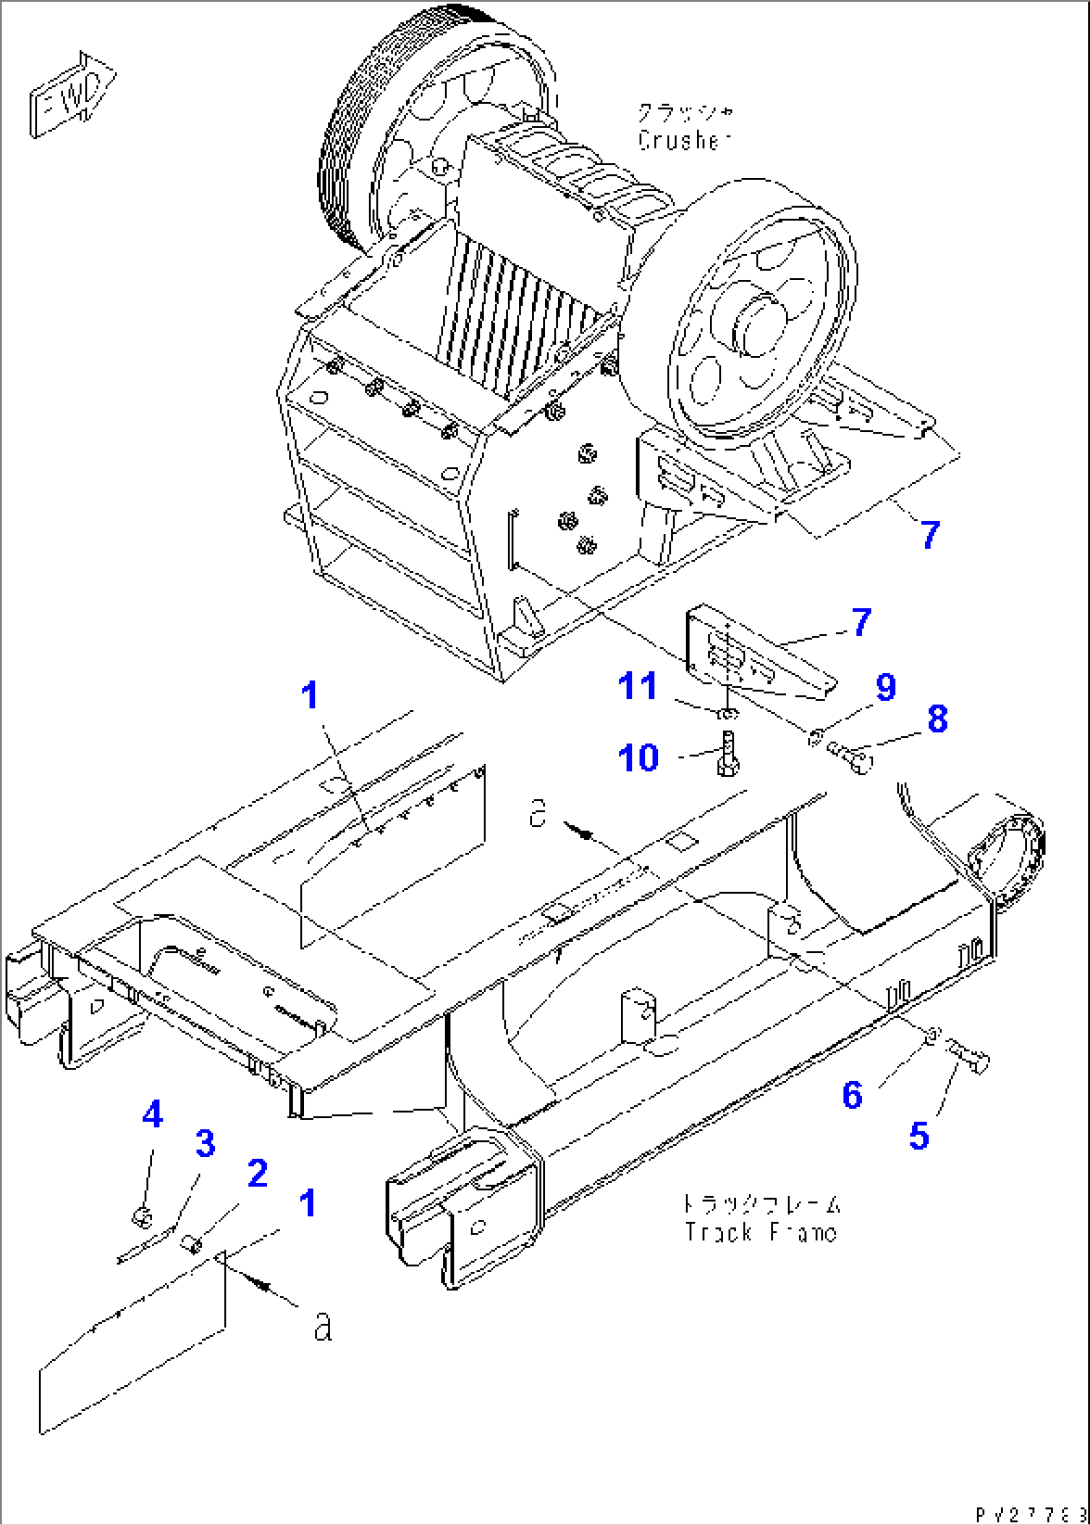 CRUSHER (CRUSHER MOUNTING PARTS AND SIDE COVER)(#1005-1500)